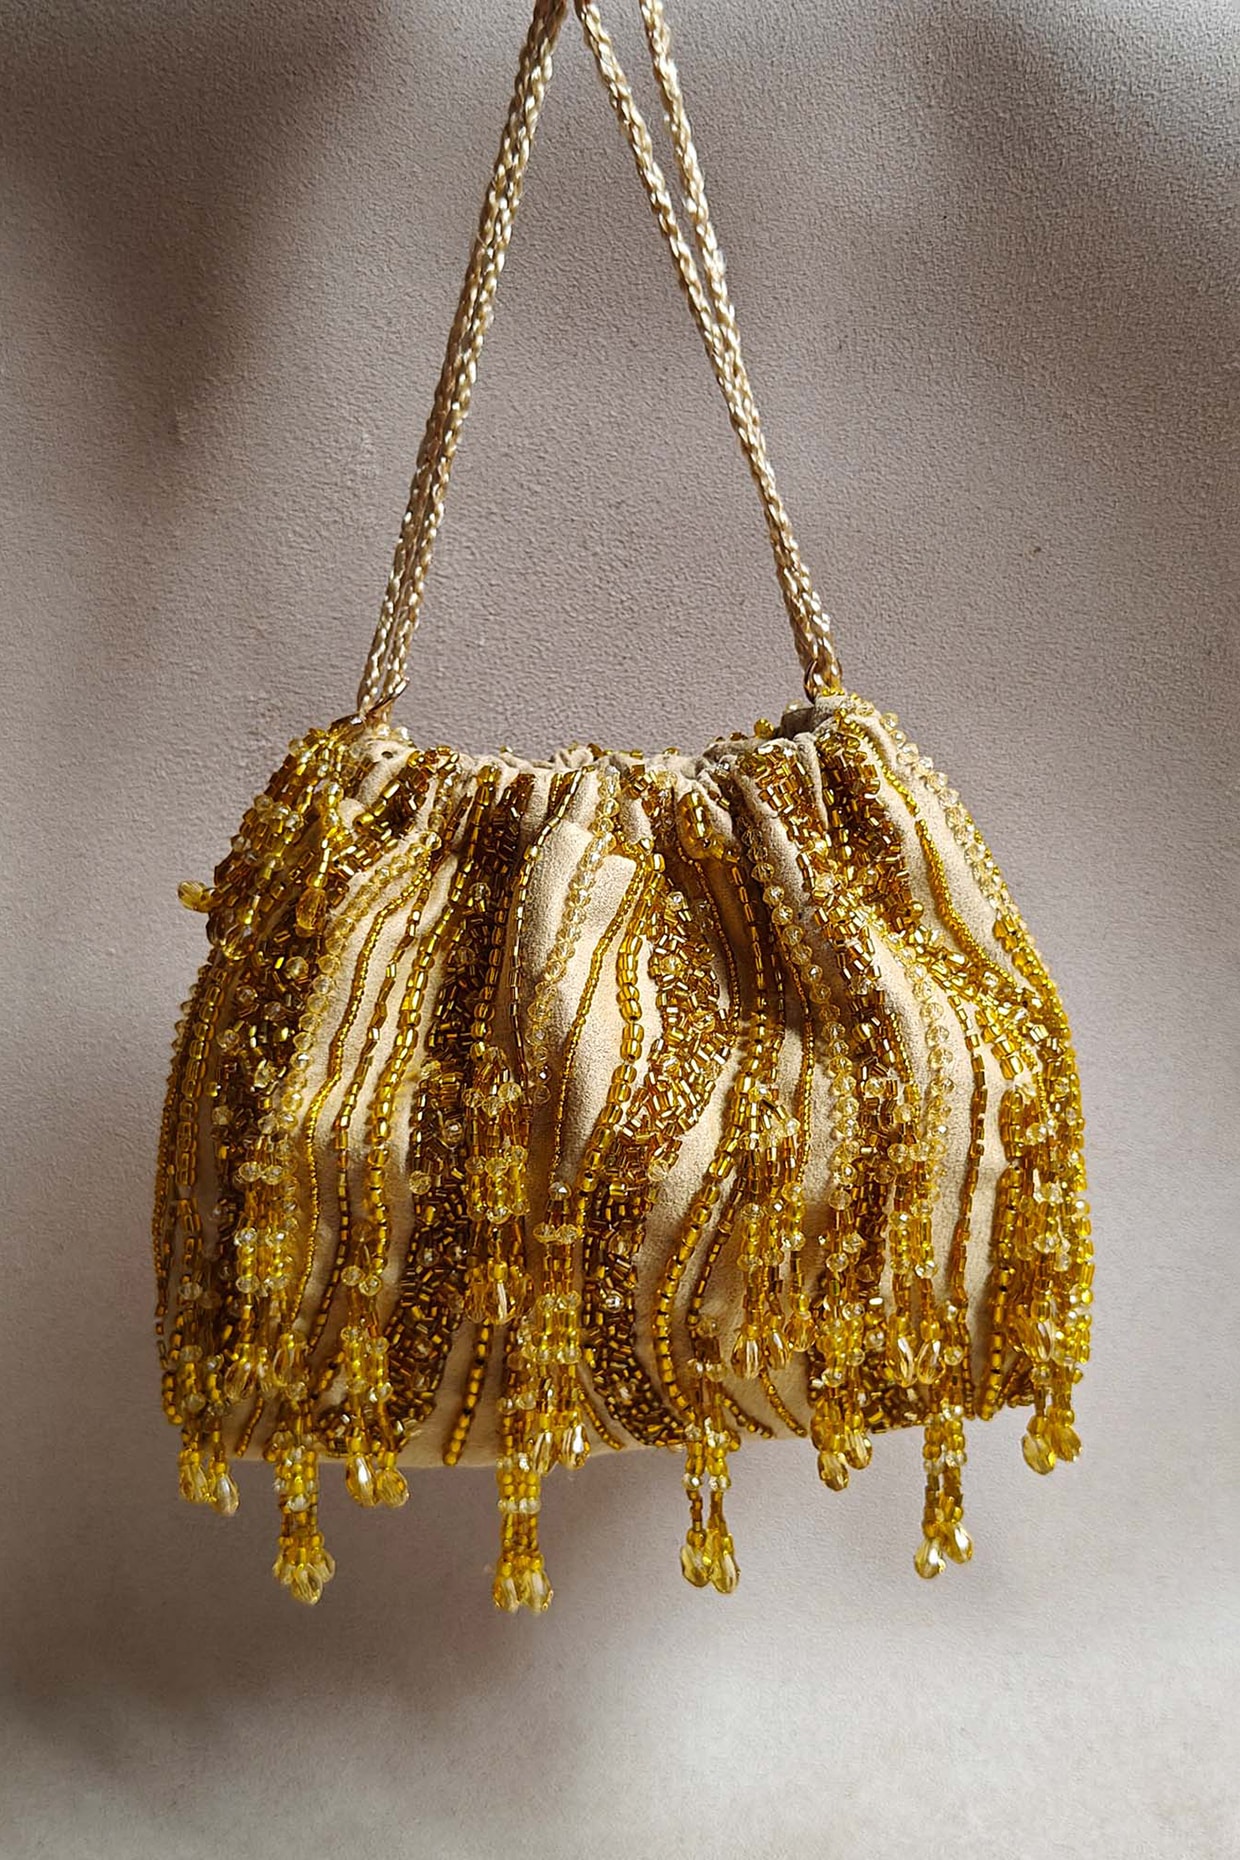 Party,marriage,gifting,silk,Ethnic,Handmade,Indian ,Clutch,bag,patchwork,traditional,bridal,bride,ladies,purse - Pralees  handmade purses - 398786